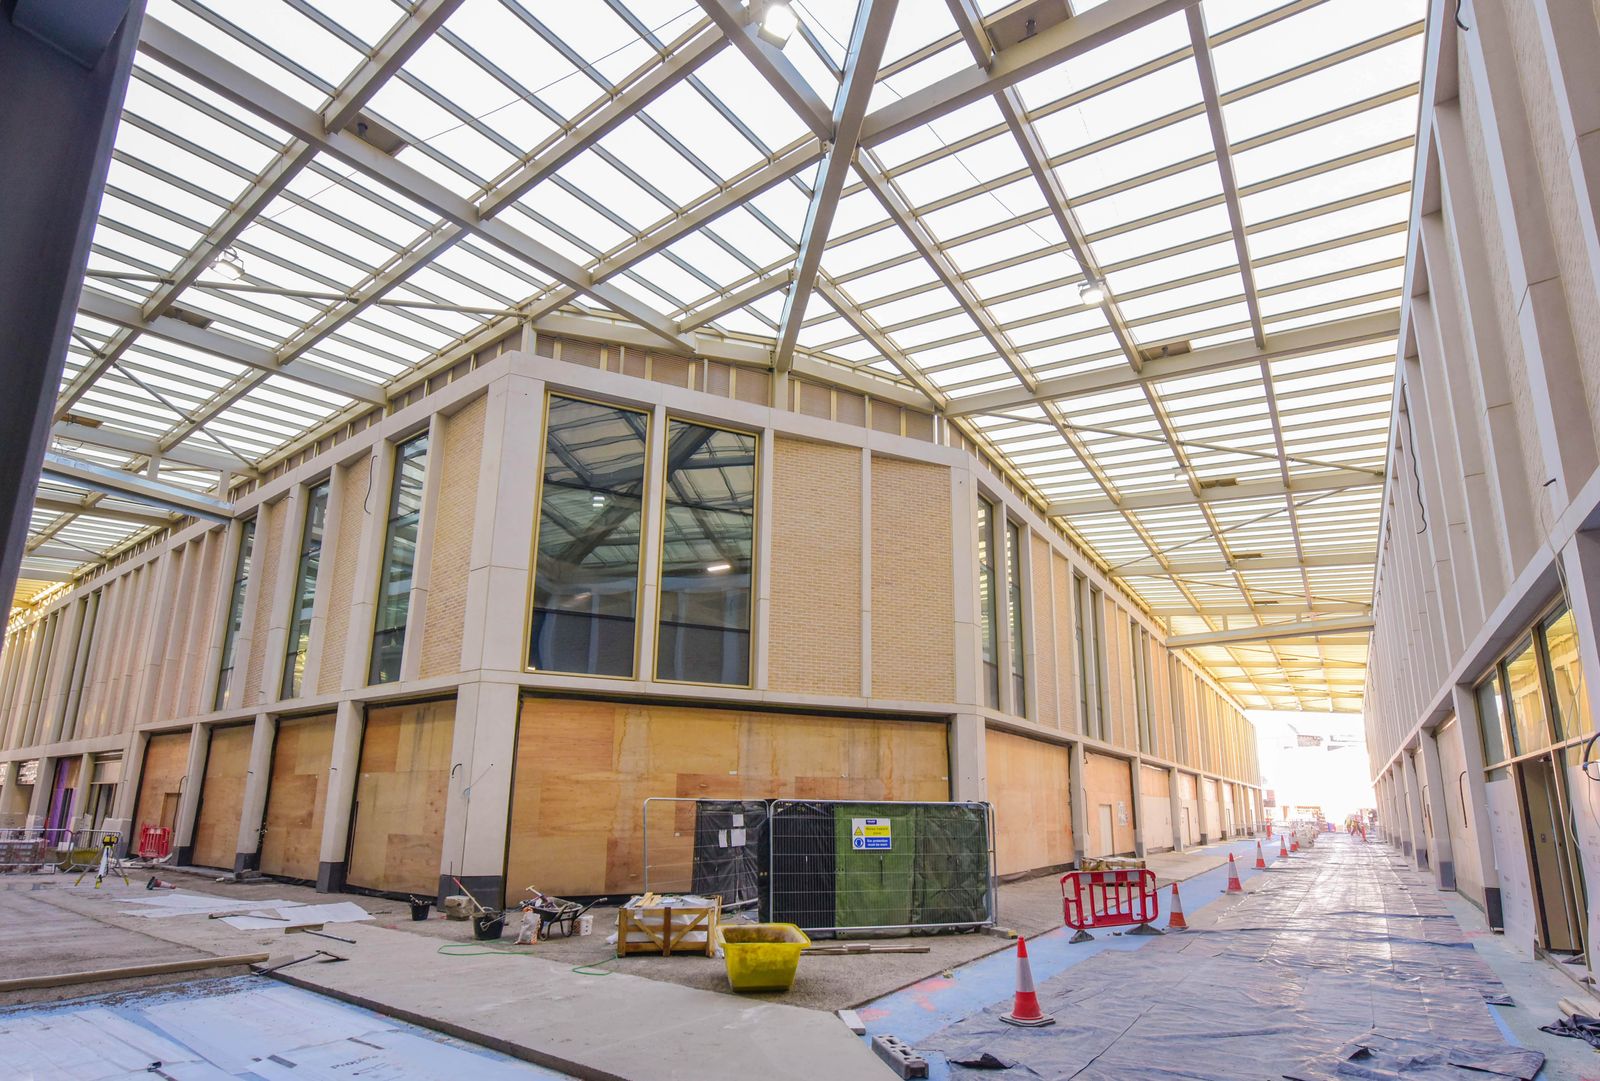 New roof's a glass act at multi-million pound Barnsley development